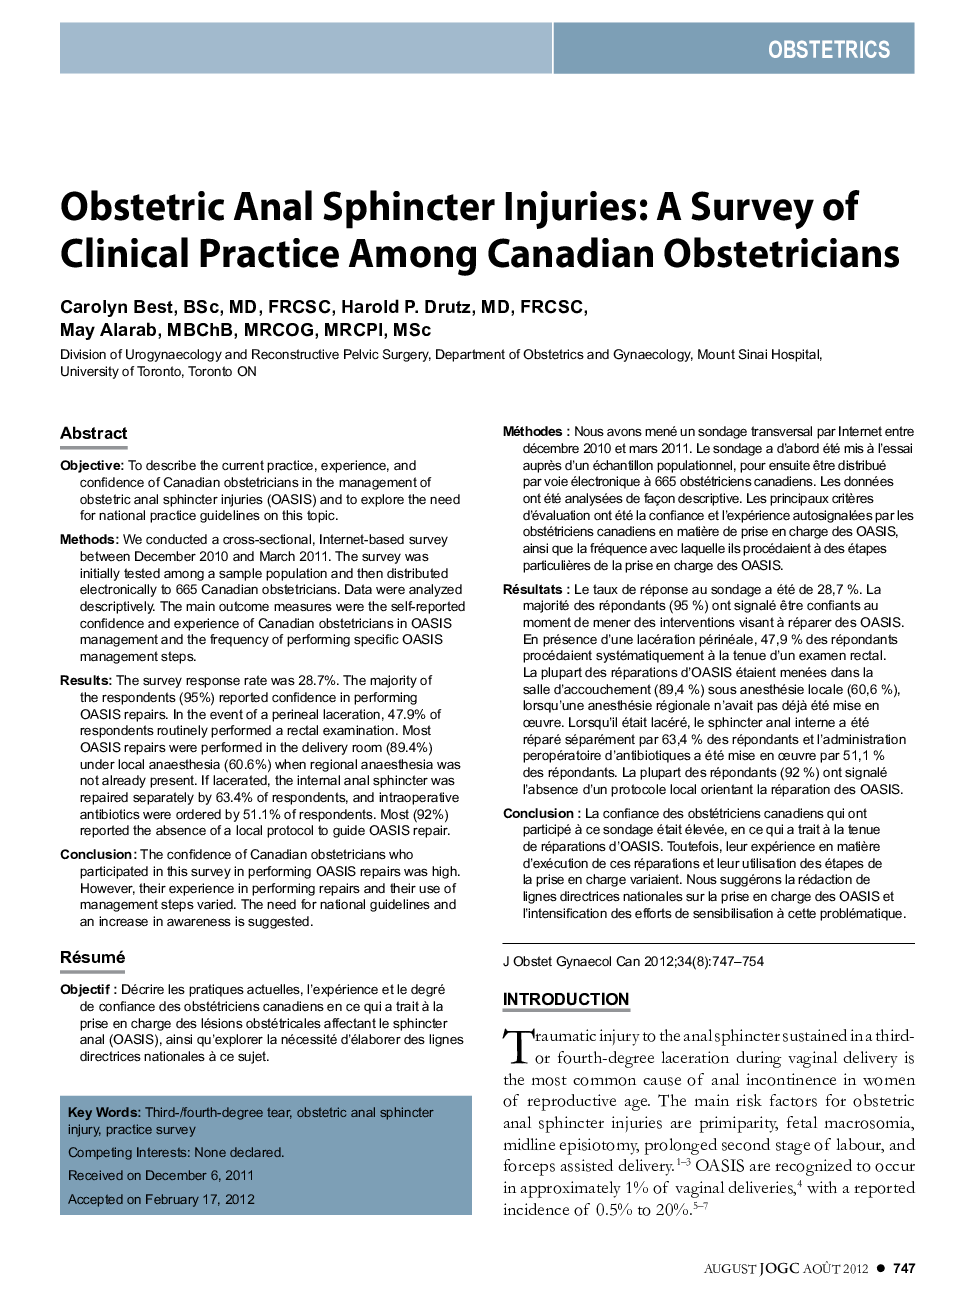 Obstetric Anal Sphincter Injuries: A Survey of Clinical Practice Among Canadian Obstetricians